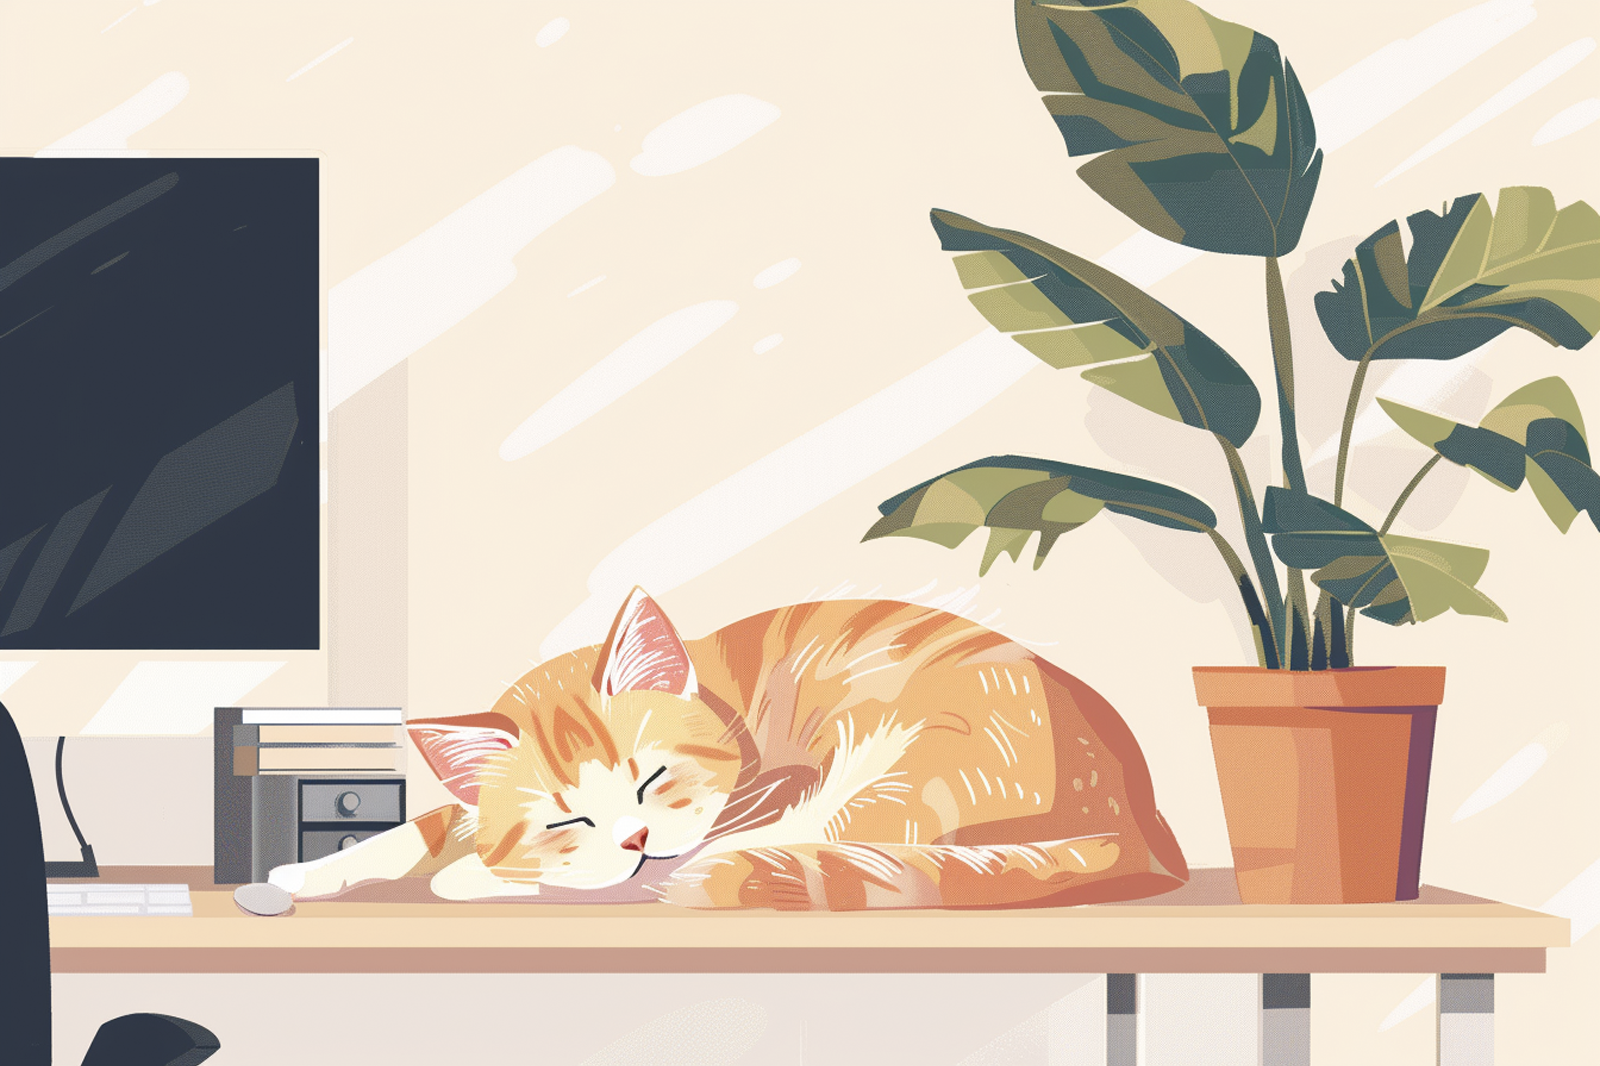 An adorable cat peacefully napping on a table, framed by a TV on one side and a potted tree on the other